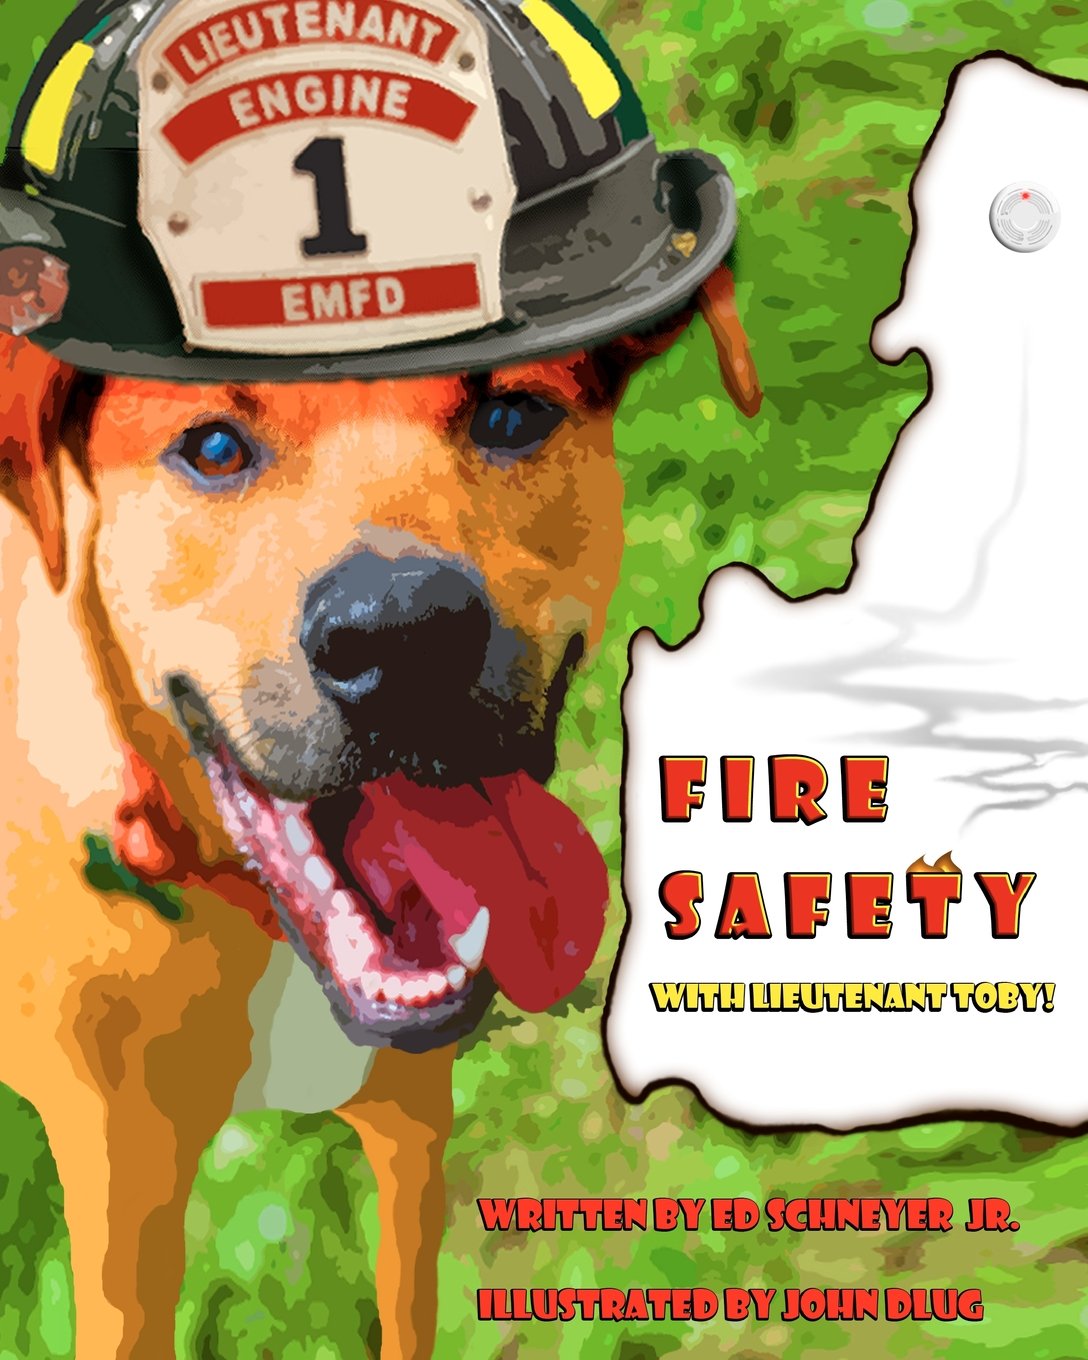 In Fire Safety with Lieutenant Toby we see illustrations that are fun and engaging for kids.